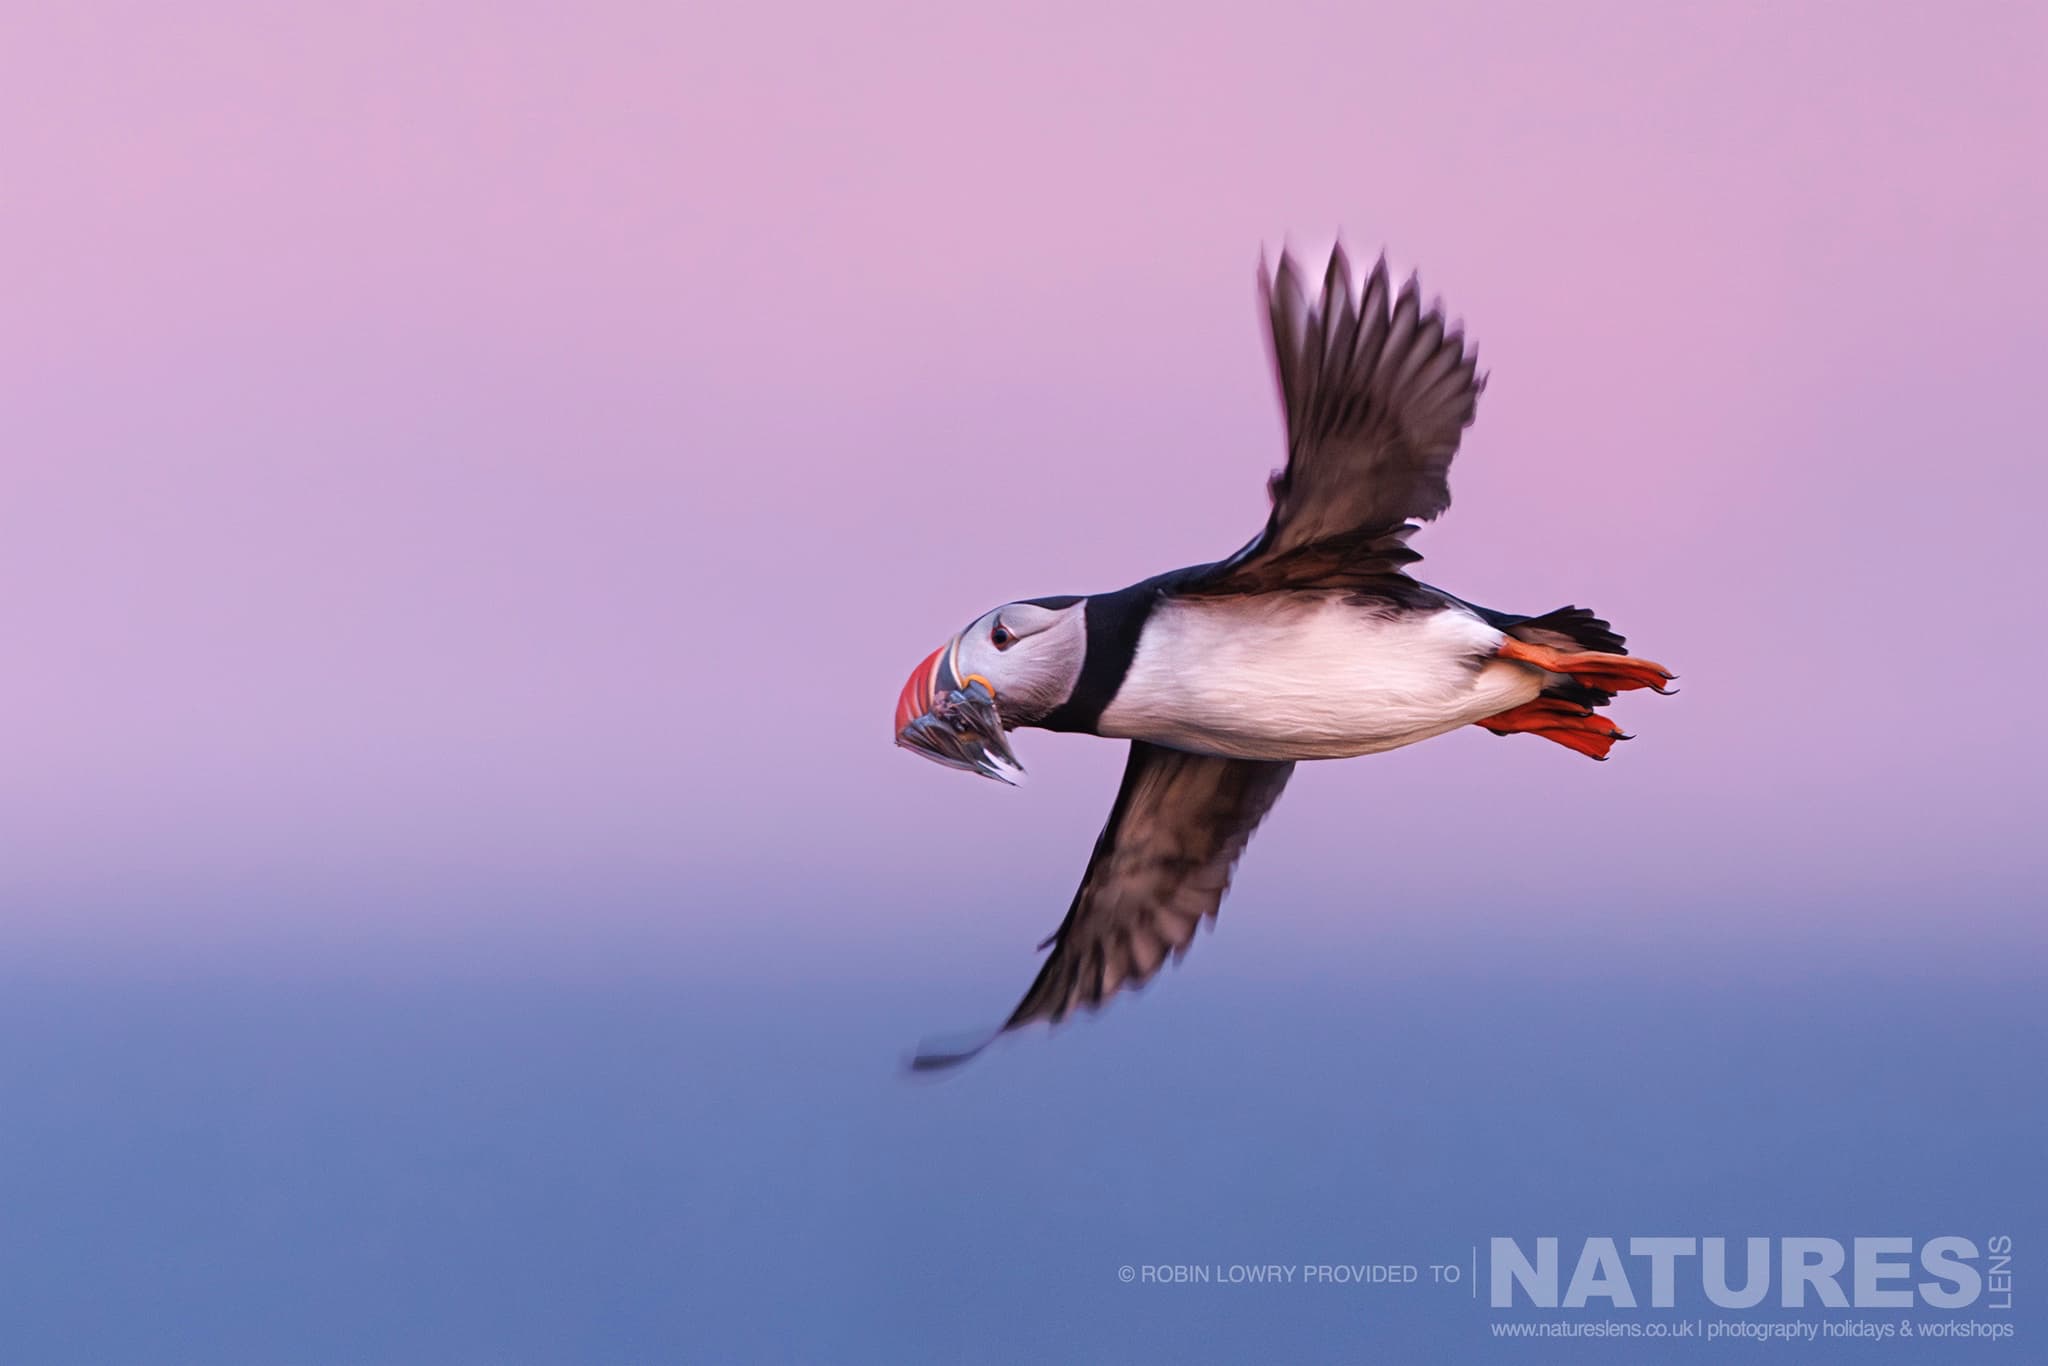 A Solo Atlantic Puffin Flying With A Beak Full Of Sand Eels Against The Pink Sky, Photographed In Their Natural Habitat On Grímsey Island, Iceland